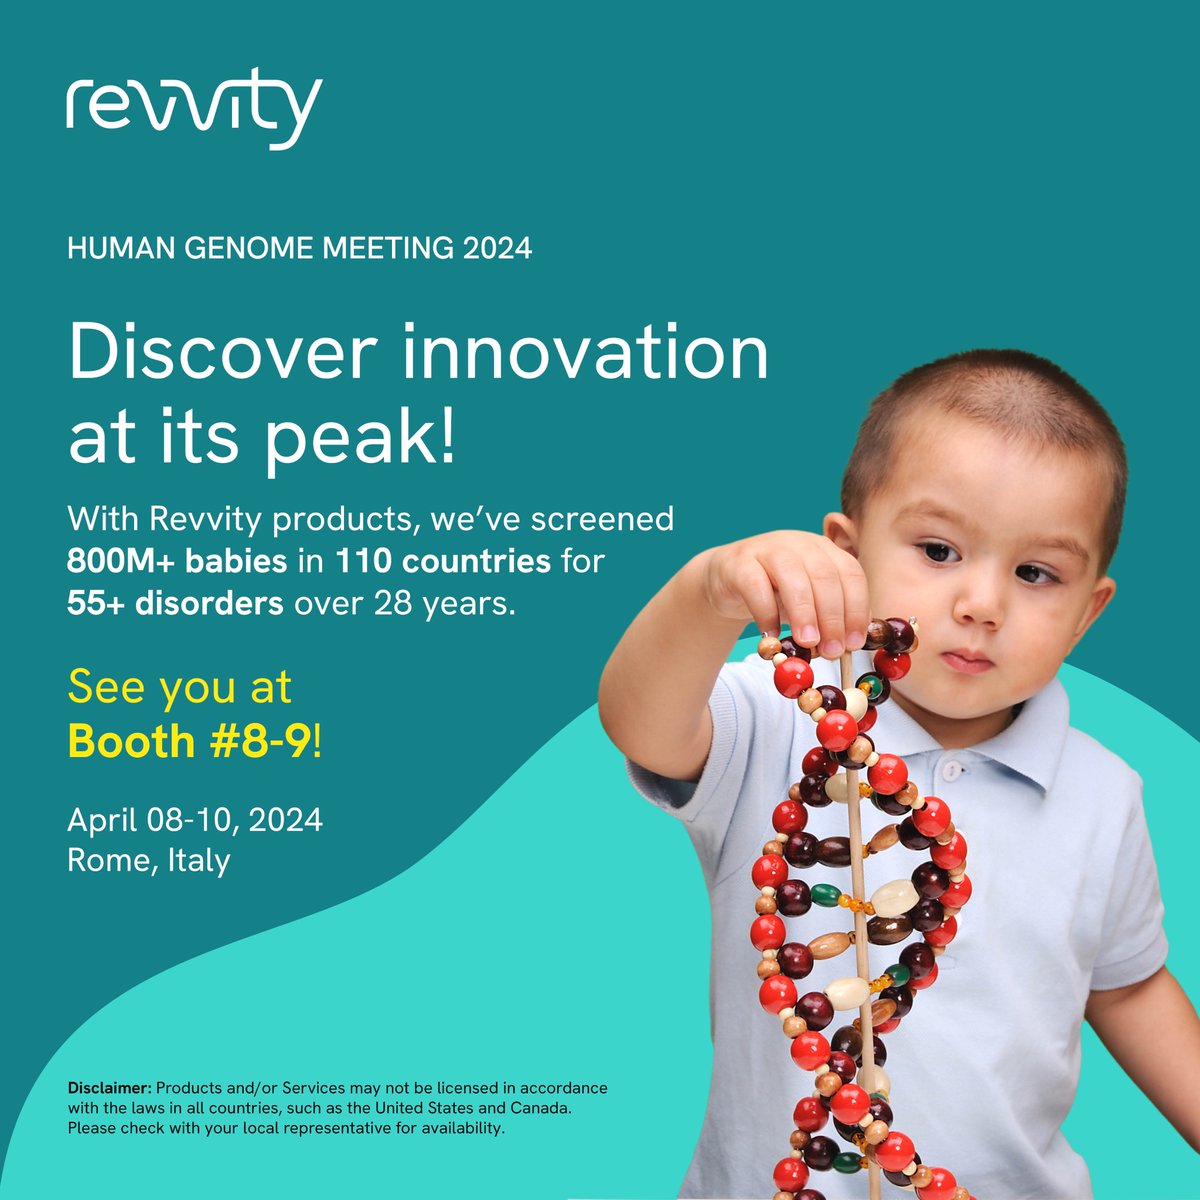 Step into the future of genetic research and maternal fetal health screening with @RevvityInc at Booth 8-9 during #HUGOHGM2024. Explore our cutting-edge portfolio solutions revolutionizing healthcare! Visit revvity.com to learn more! #HGM24 #HUGO2024